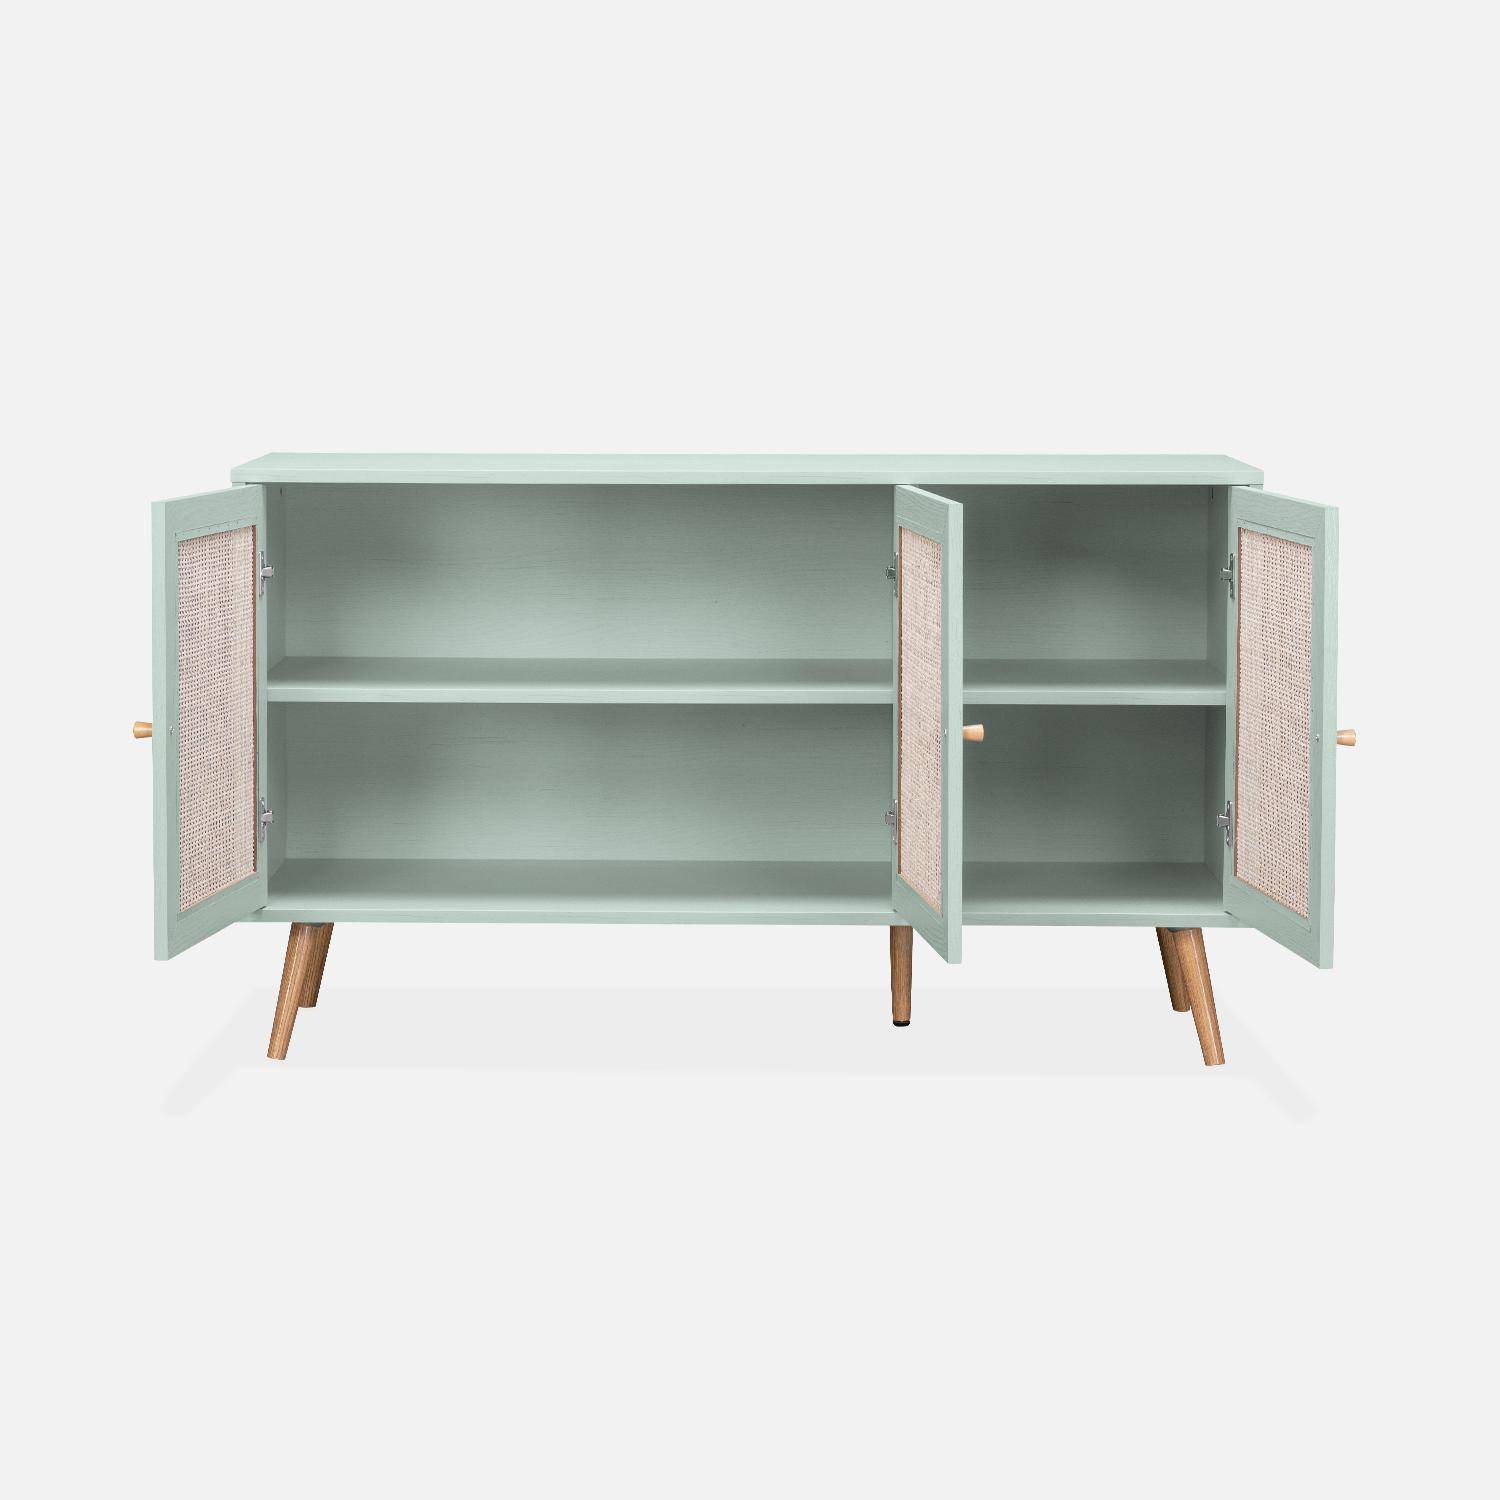 Wooden and cane rattan detail sideboard with 3 doors, 2 shelves, Scandi-style legs, 120x39x70cm - Boheme - Pastel Green,sweeek,Photo5